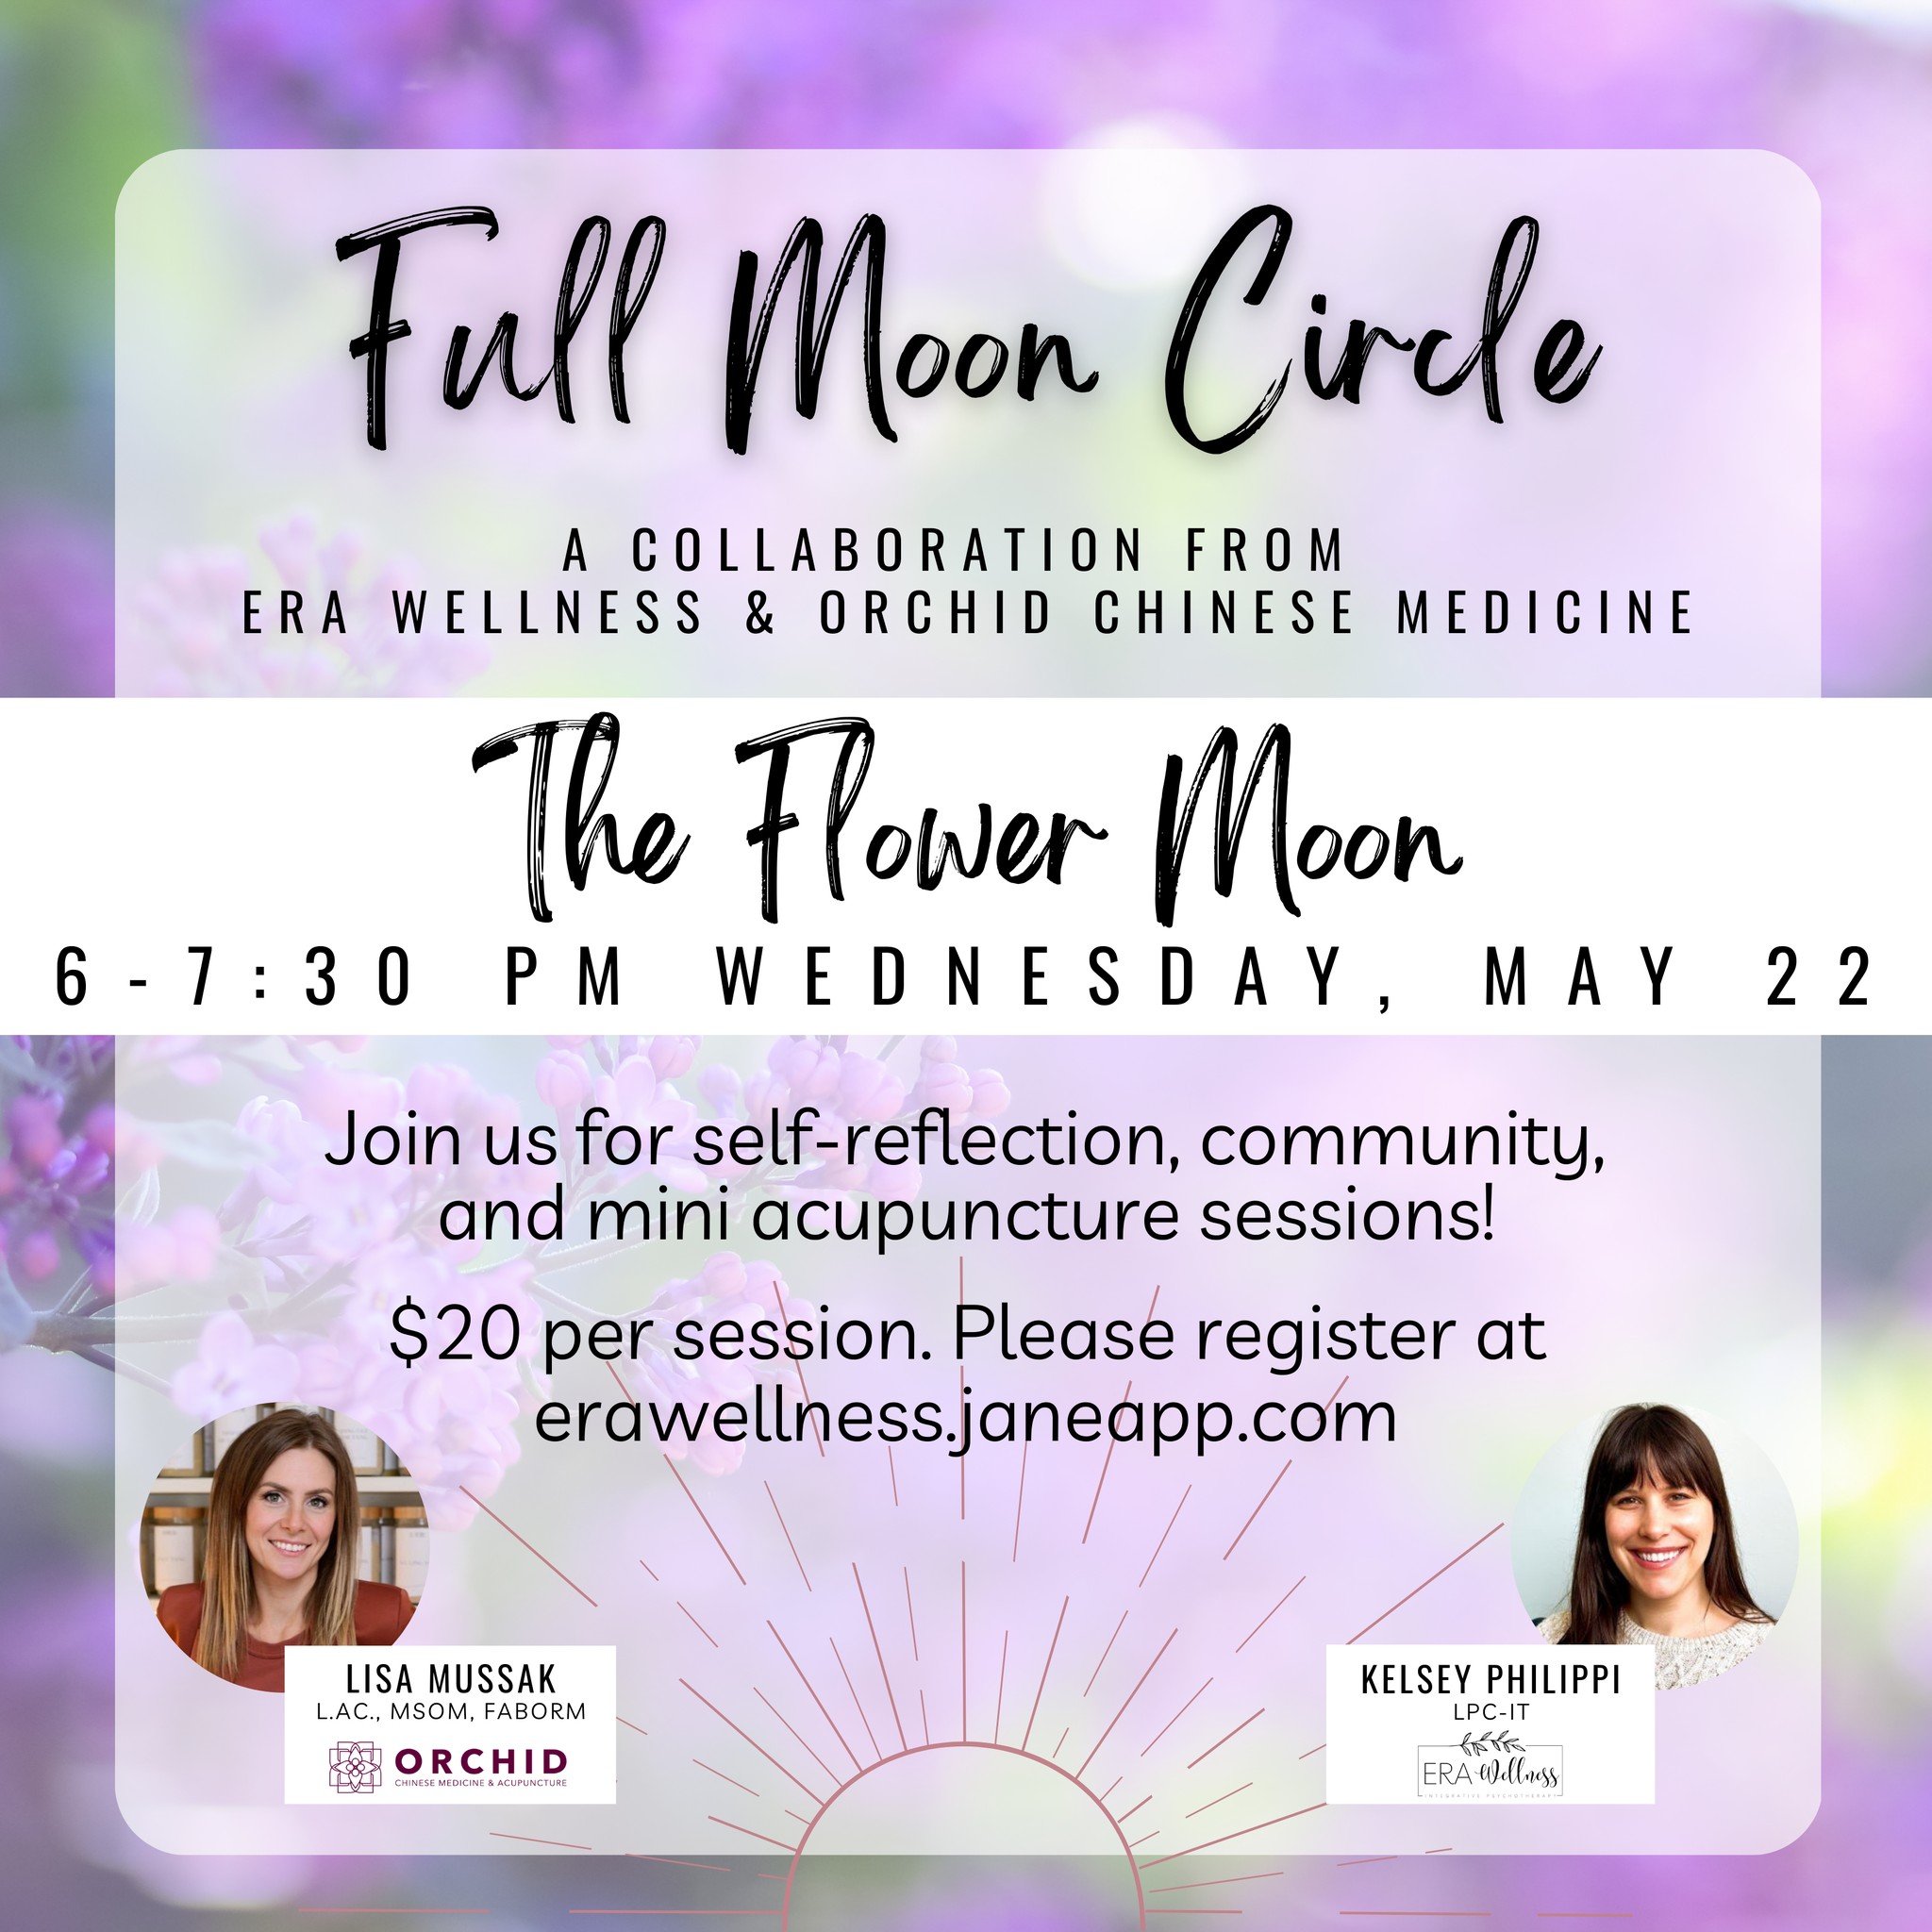 🌸 Our May Full Moon Circle is coming up on Wednesday, May 22! 🌸

Join Kelsey and Lisa @orchidchinesemed to learn about the Flower Moon! Trust us - these sessions are truly magical. ✨

Each Full Moon Circle is $20 and includes light snacks and a min